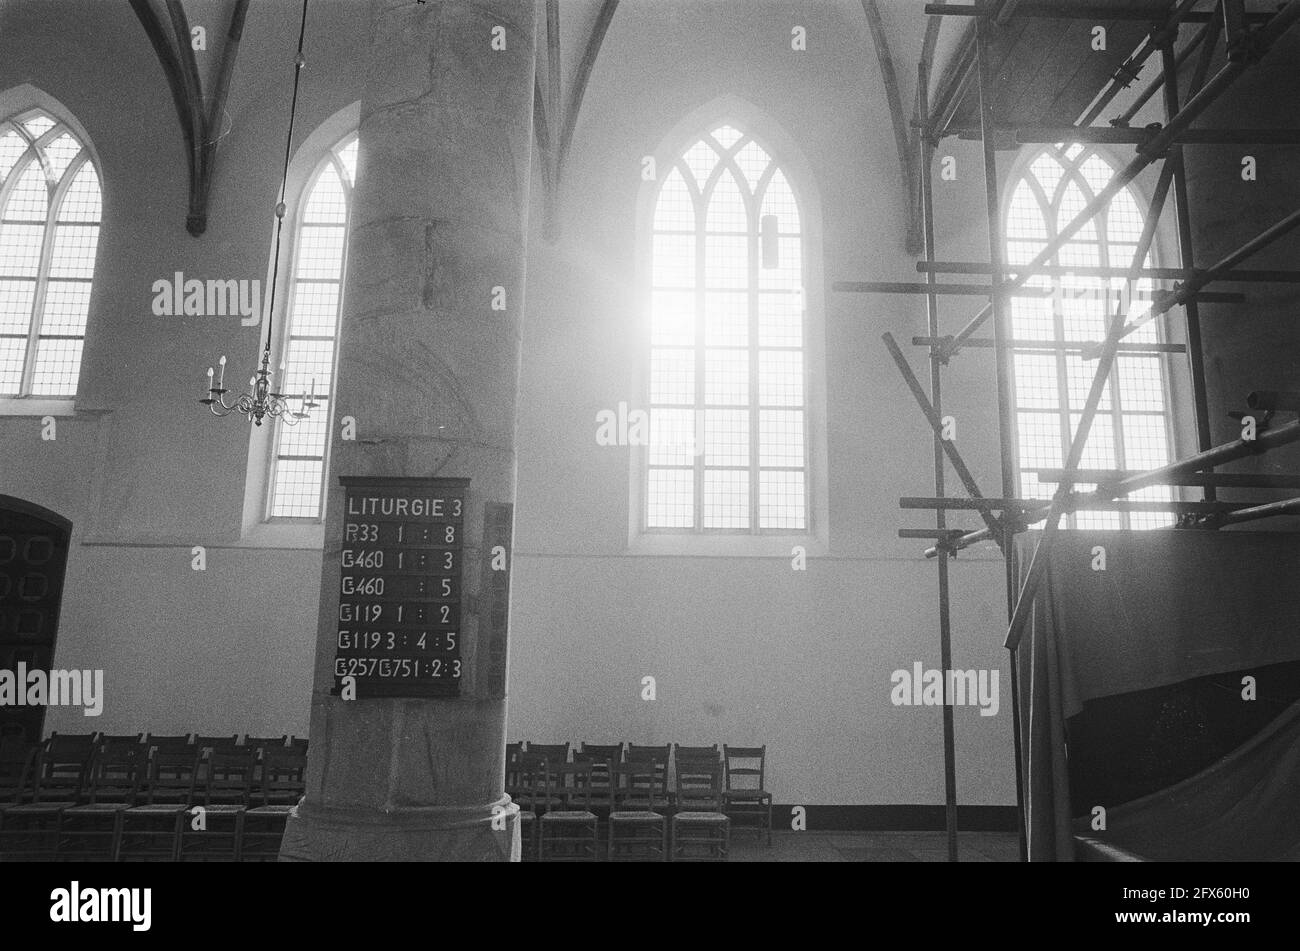 Grote of St. Vituskerk in Naarden restored; various fragments, 23 November 1978, churches, The Netherlands, 20th century press agency photo, news to remember, documentary, historic photography 1945-1990, visual stories, human history of the Twentieth Century, capturing moments in time Stock Photo